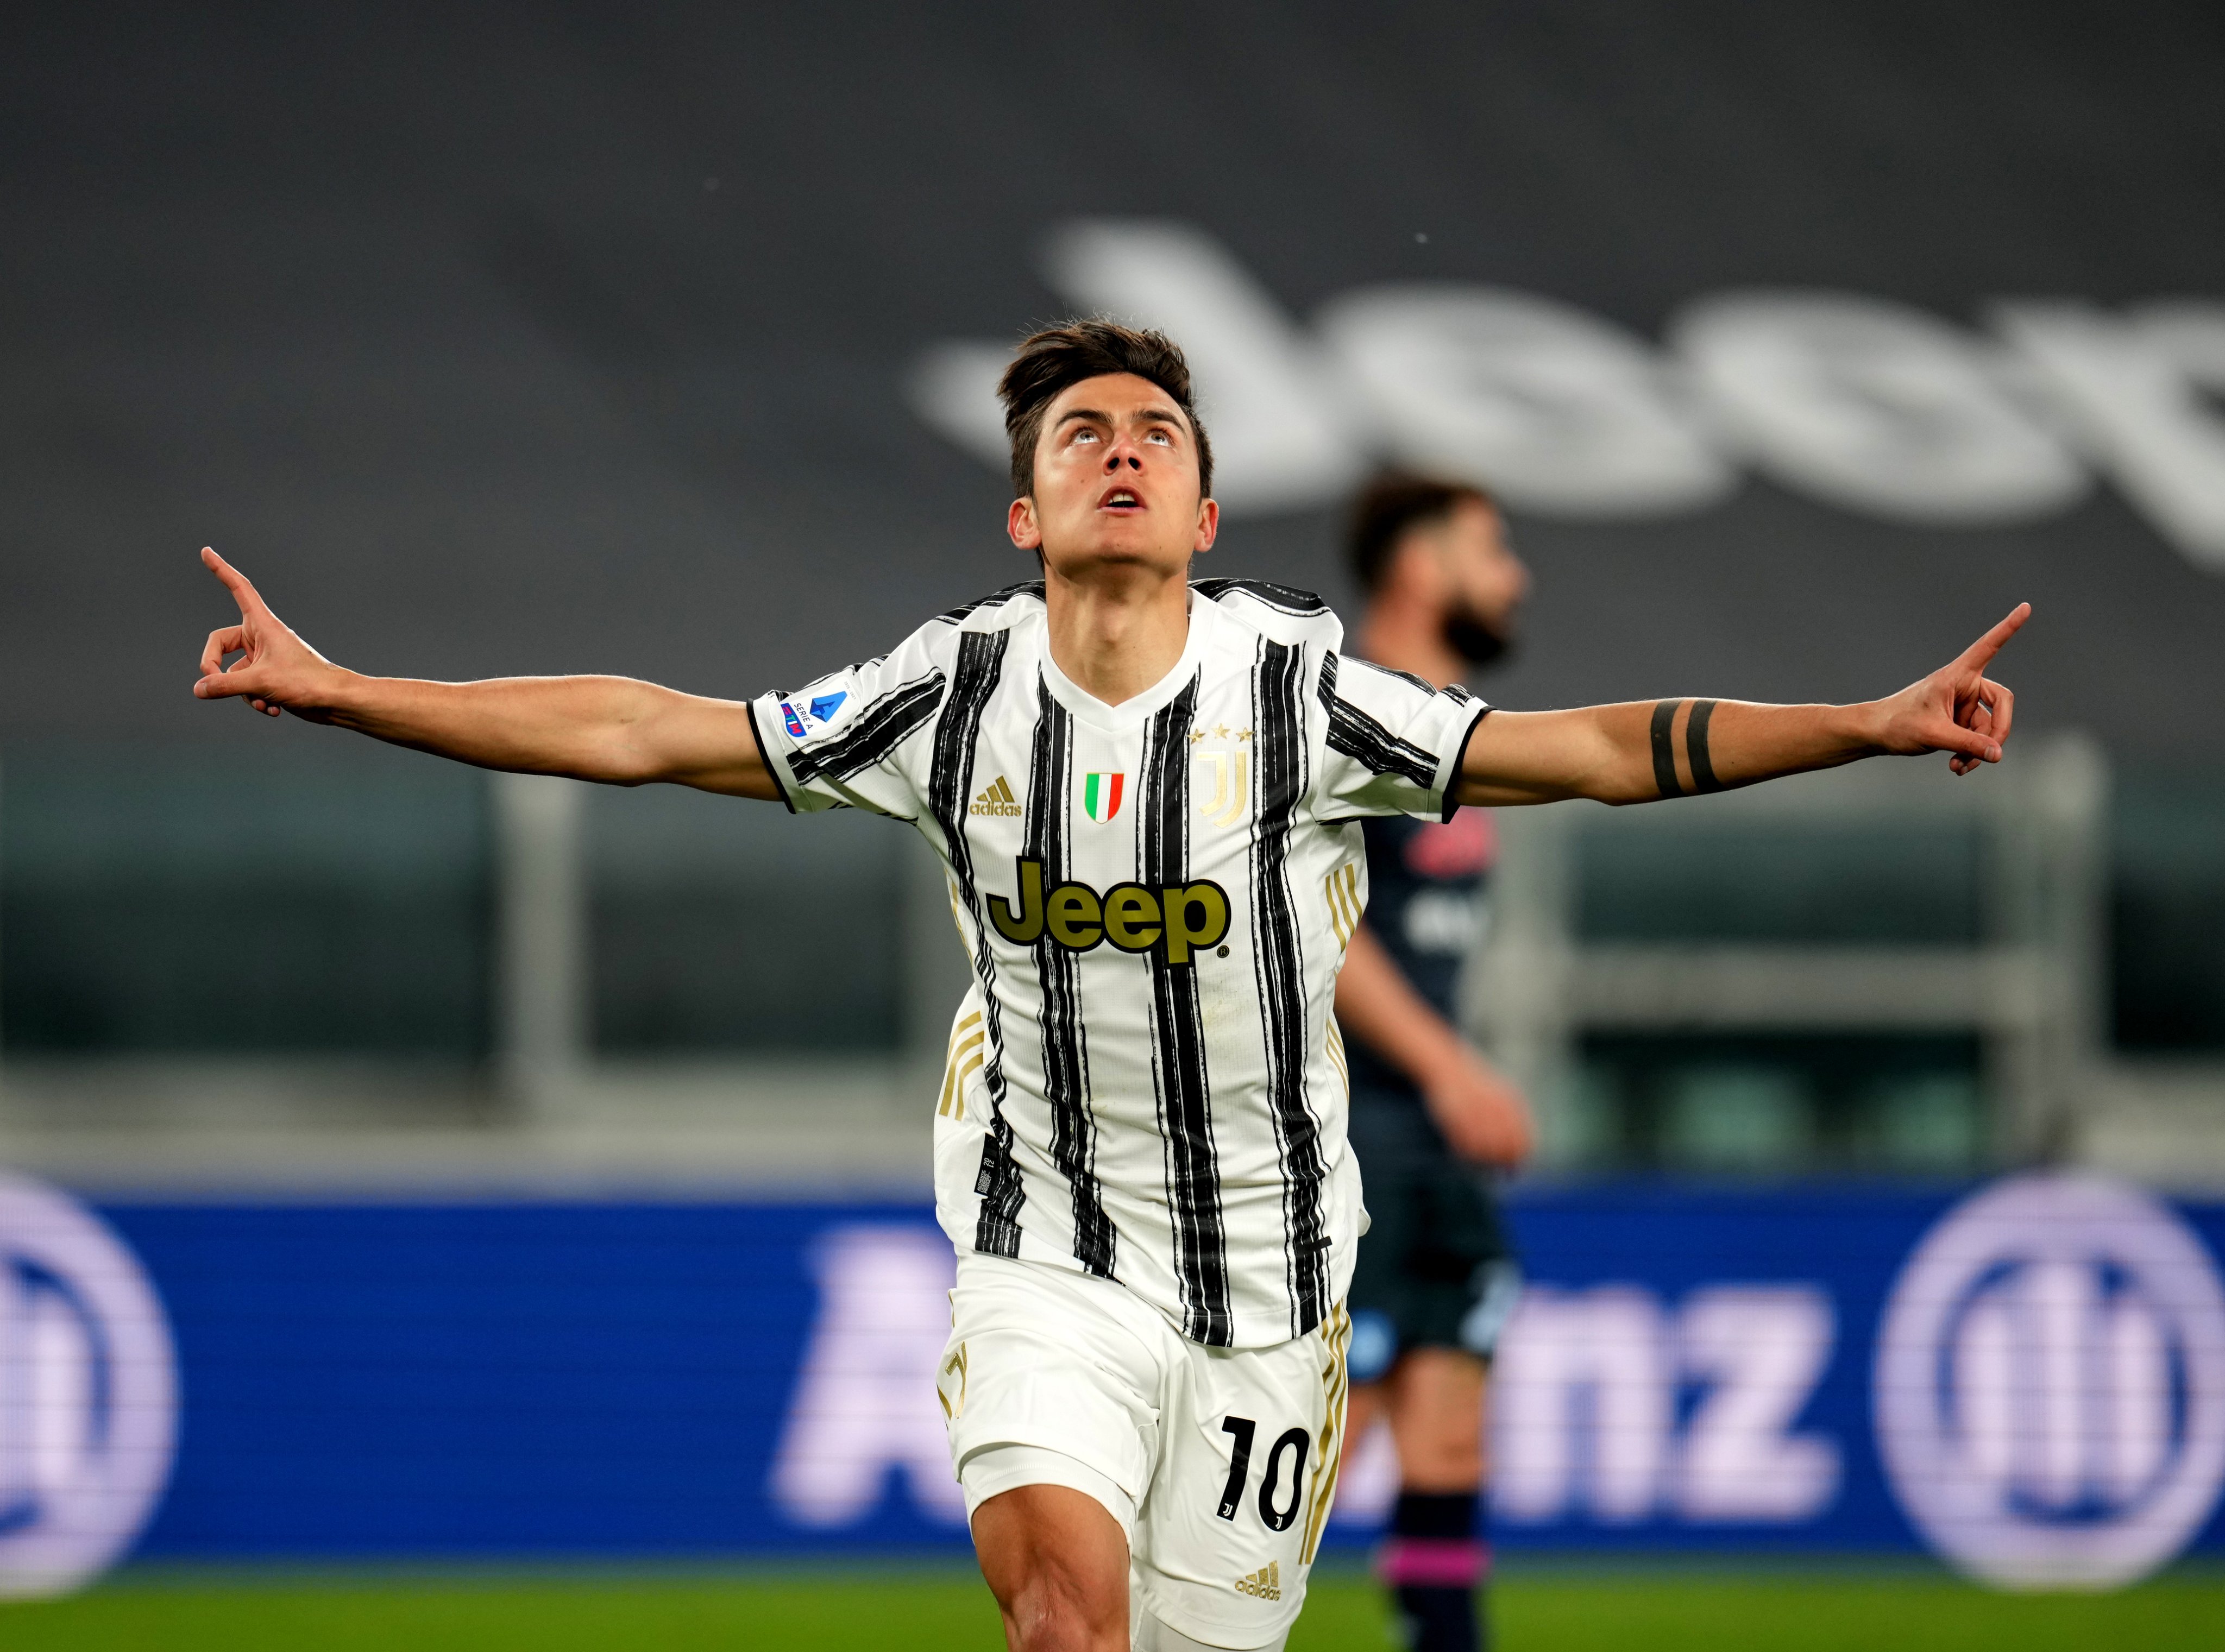 Paulo Dybala confirms that he is set to leave Juventus at end of 2021/22 season